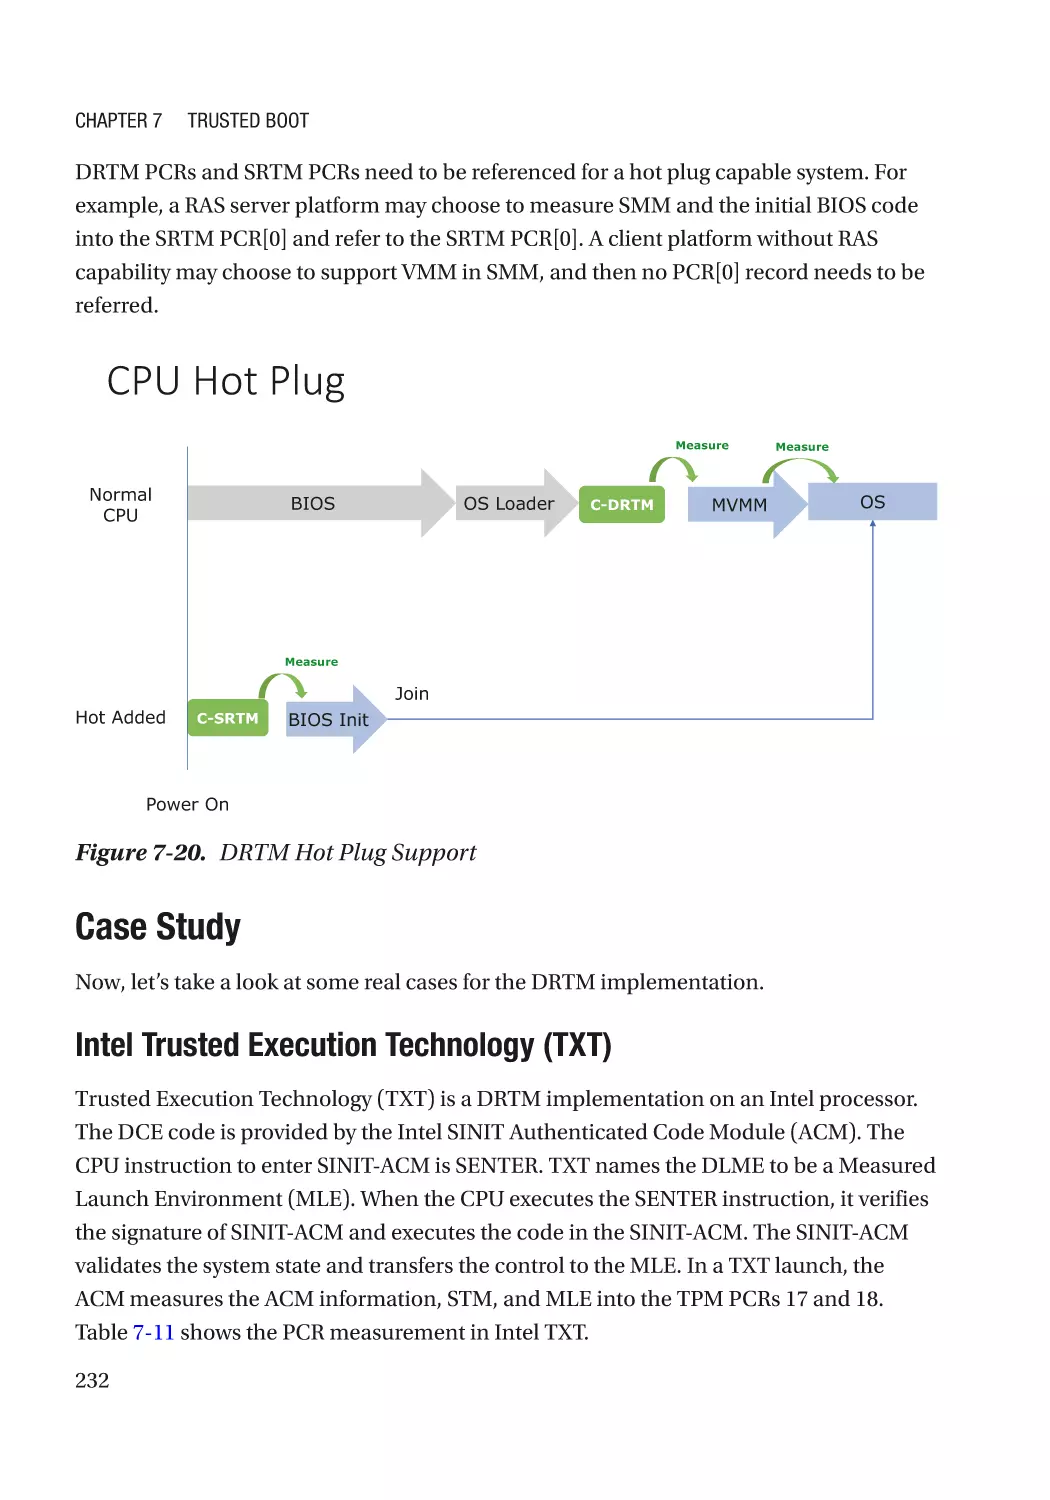 Case Study
Intel Trusted Execution Technology (TXT)